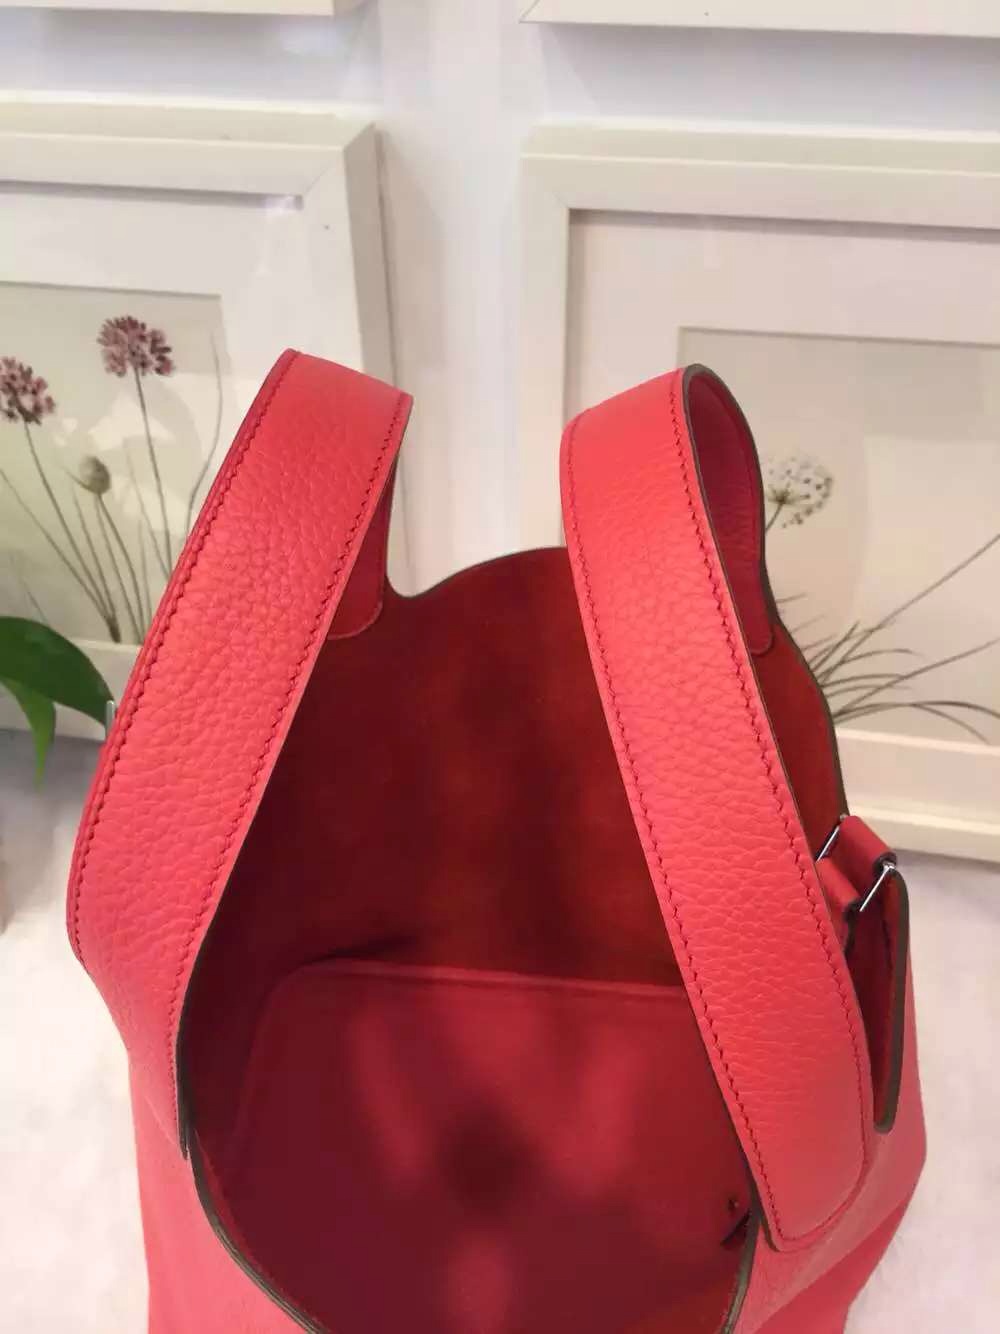 Luxury Hermes France Togo Leather Picotin Lock Bag in 2R Peony Red Two Size